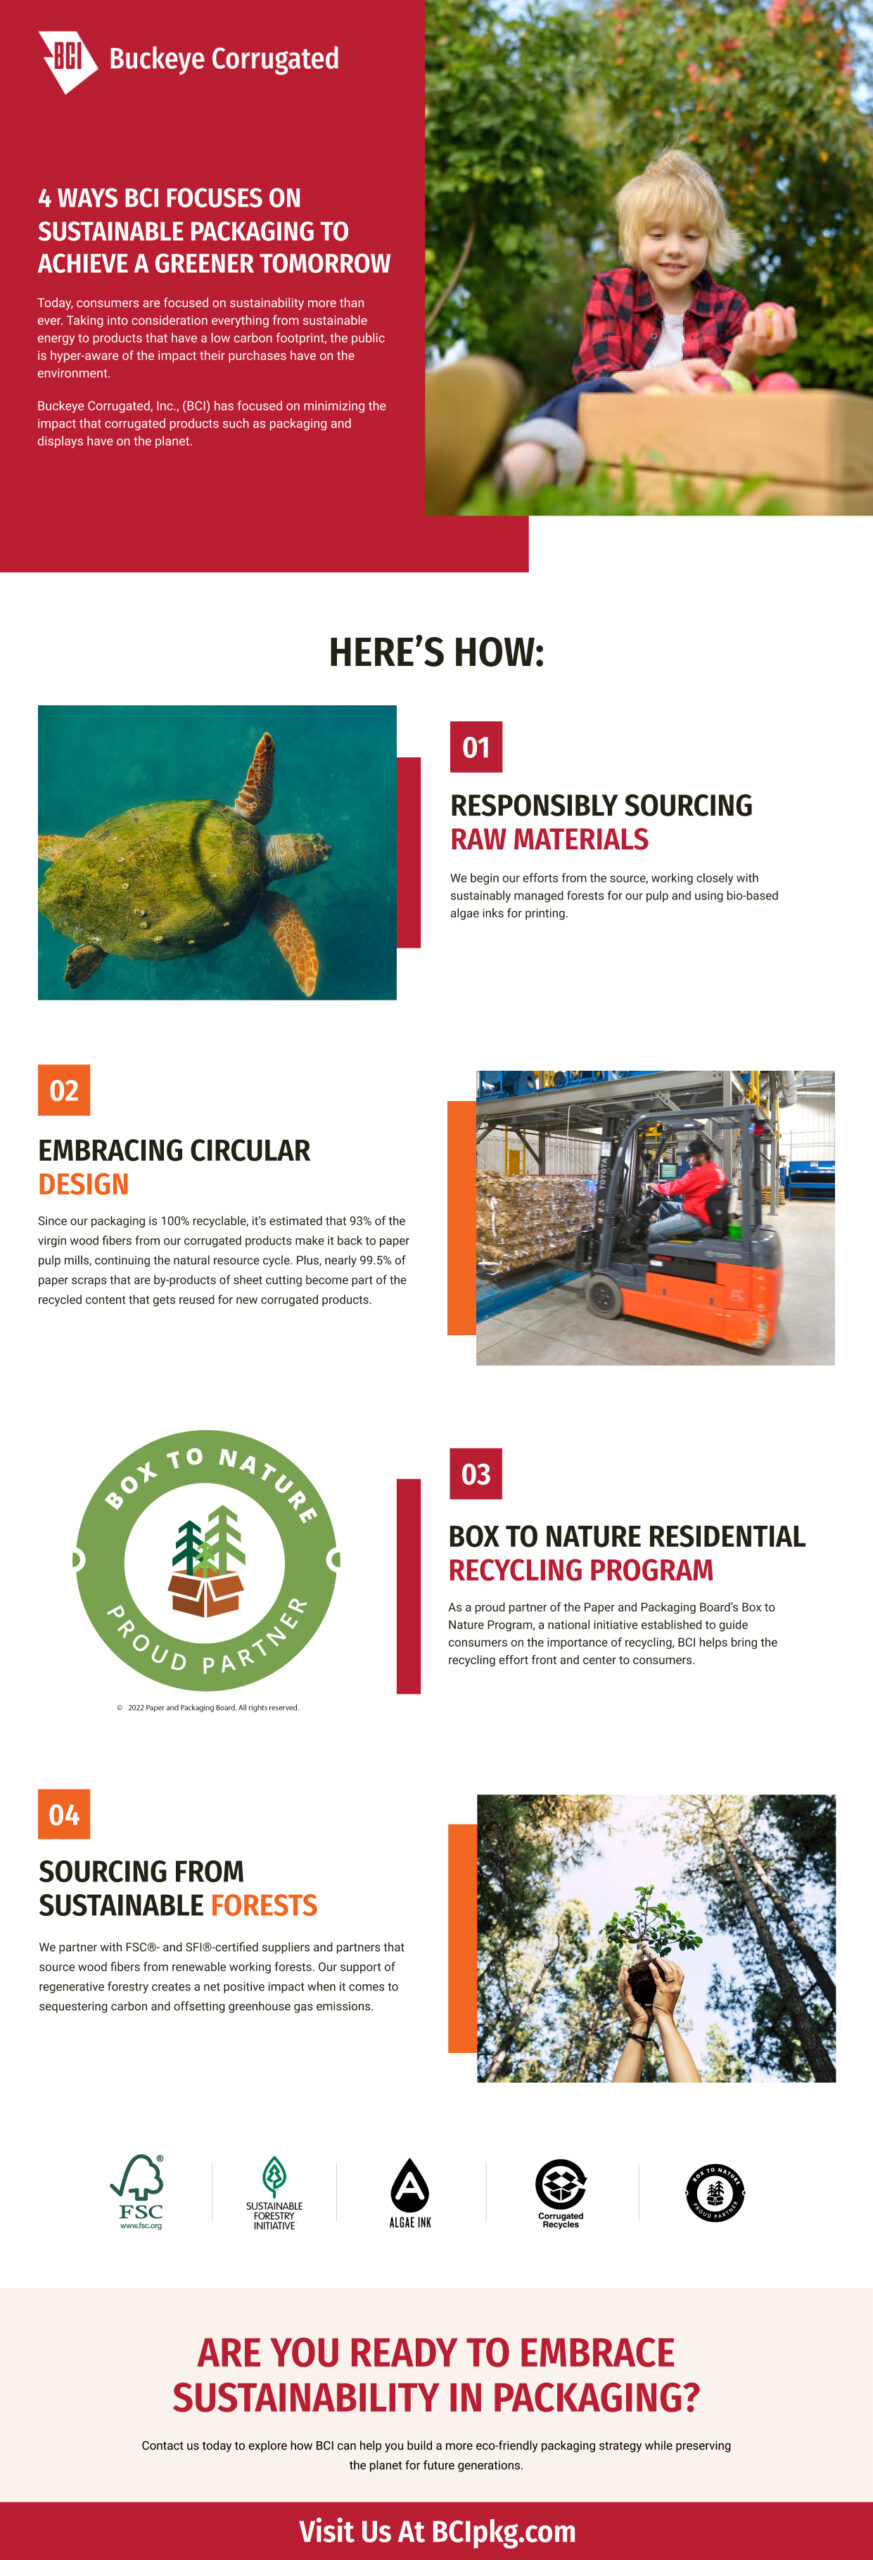 infographic explaining 4 ways BCI focuses on sustainable packaging